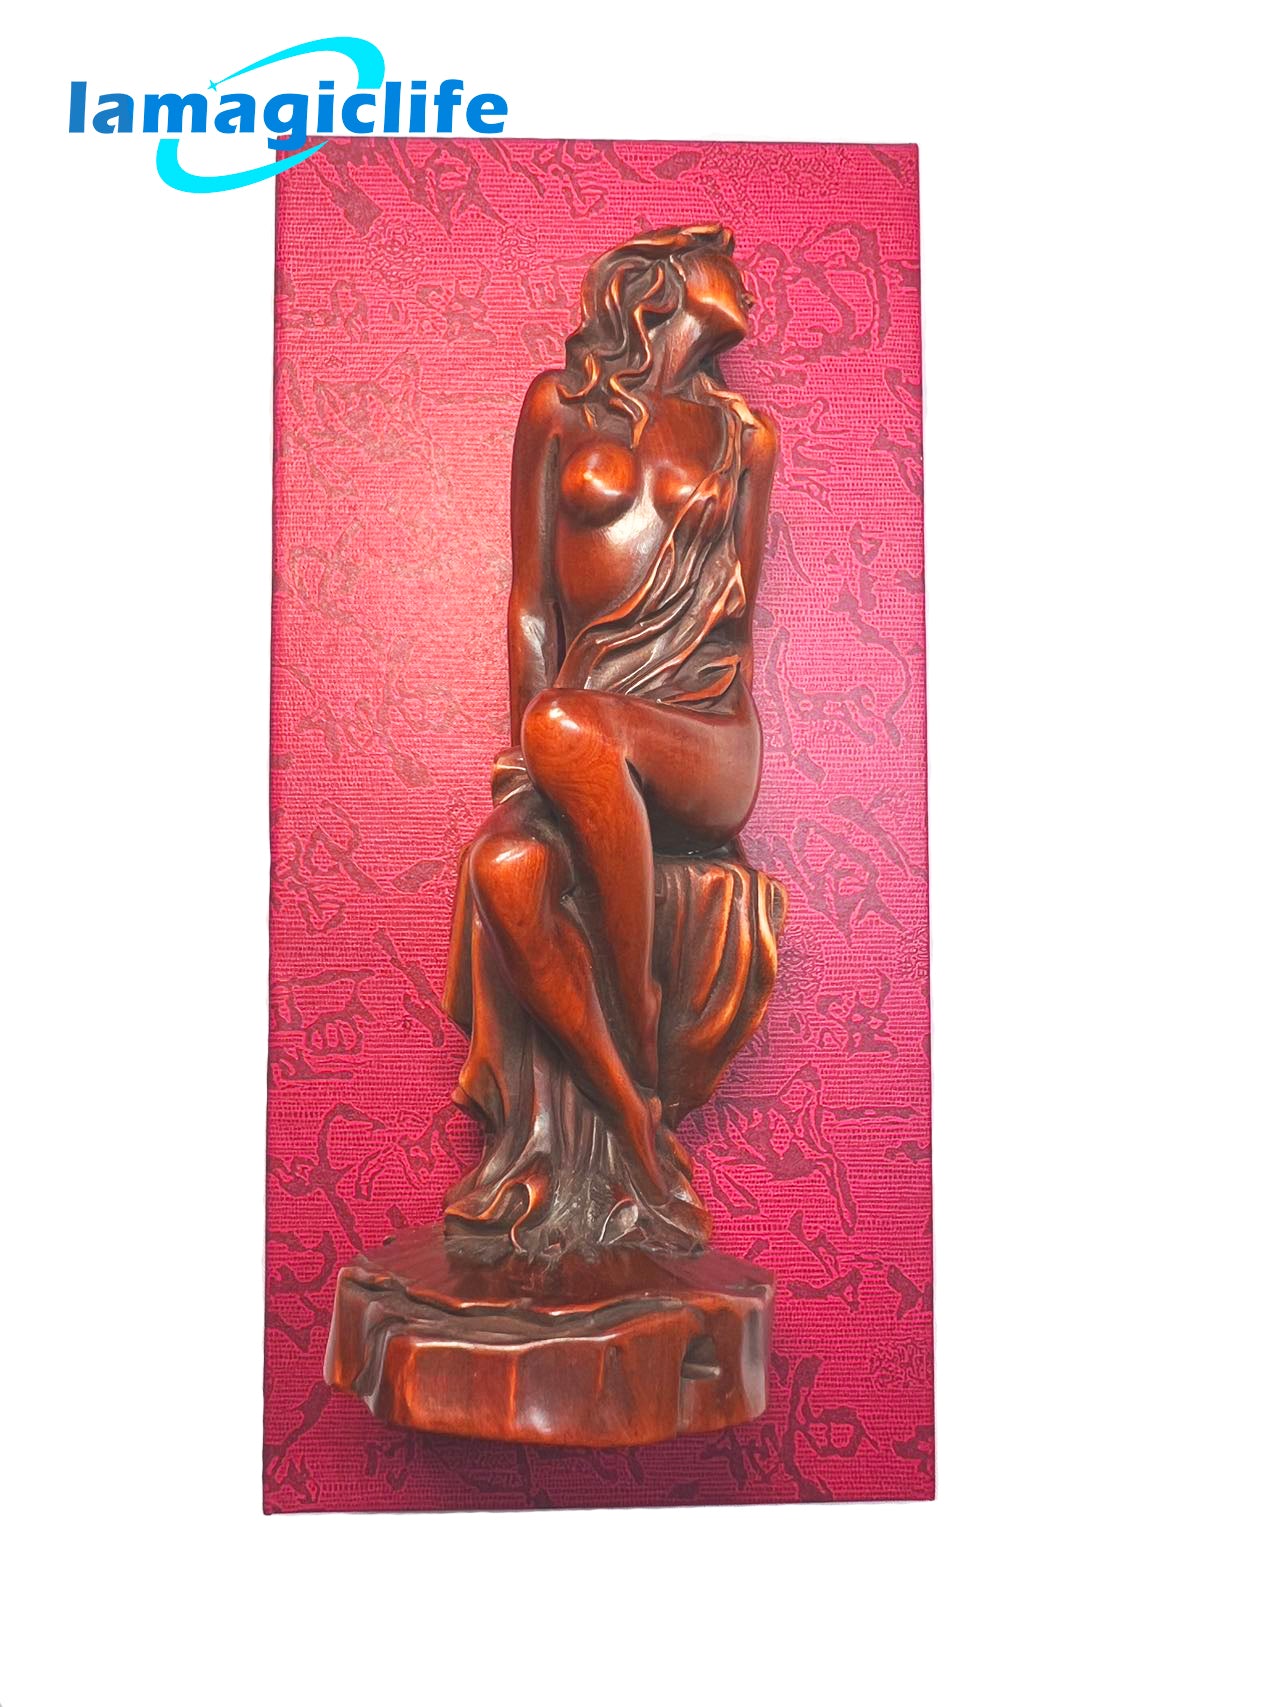 Artisan Lamagiclife Crafted Elegance Antique-Inspired Goddess Sculpture in Pure Handcrafted Yellow Boxwood